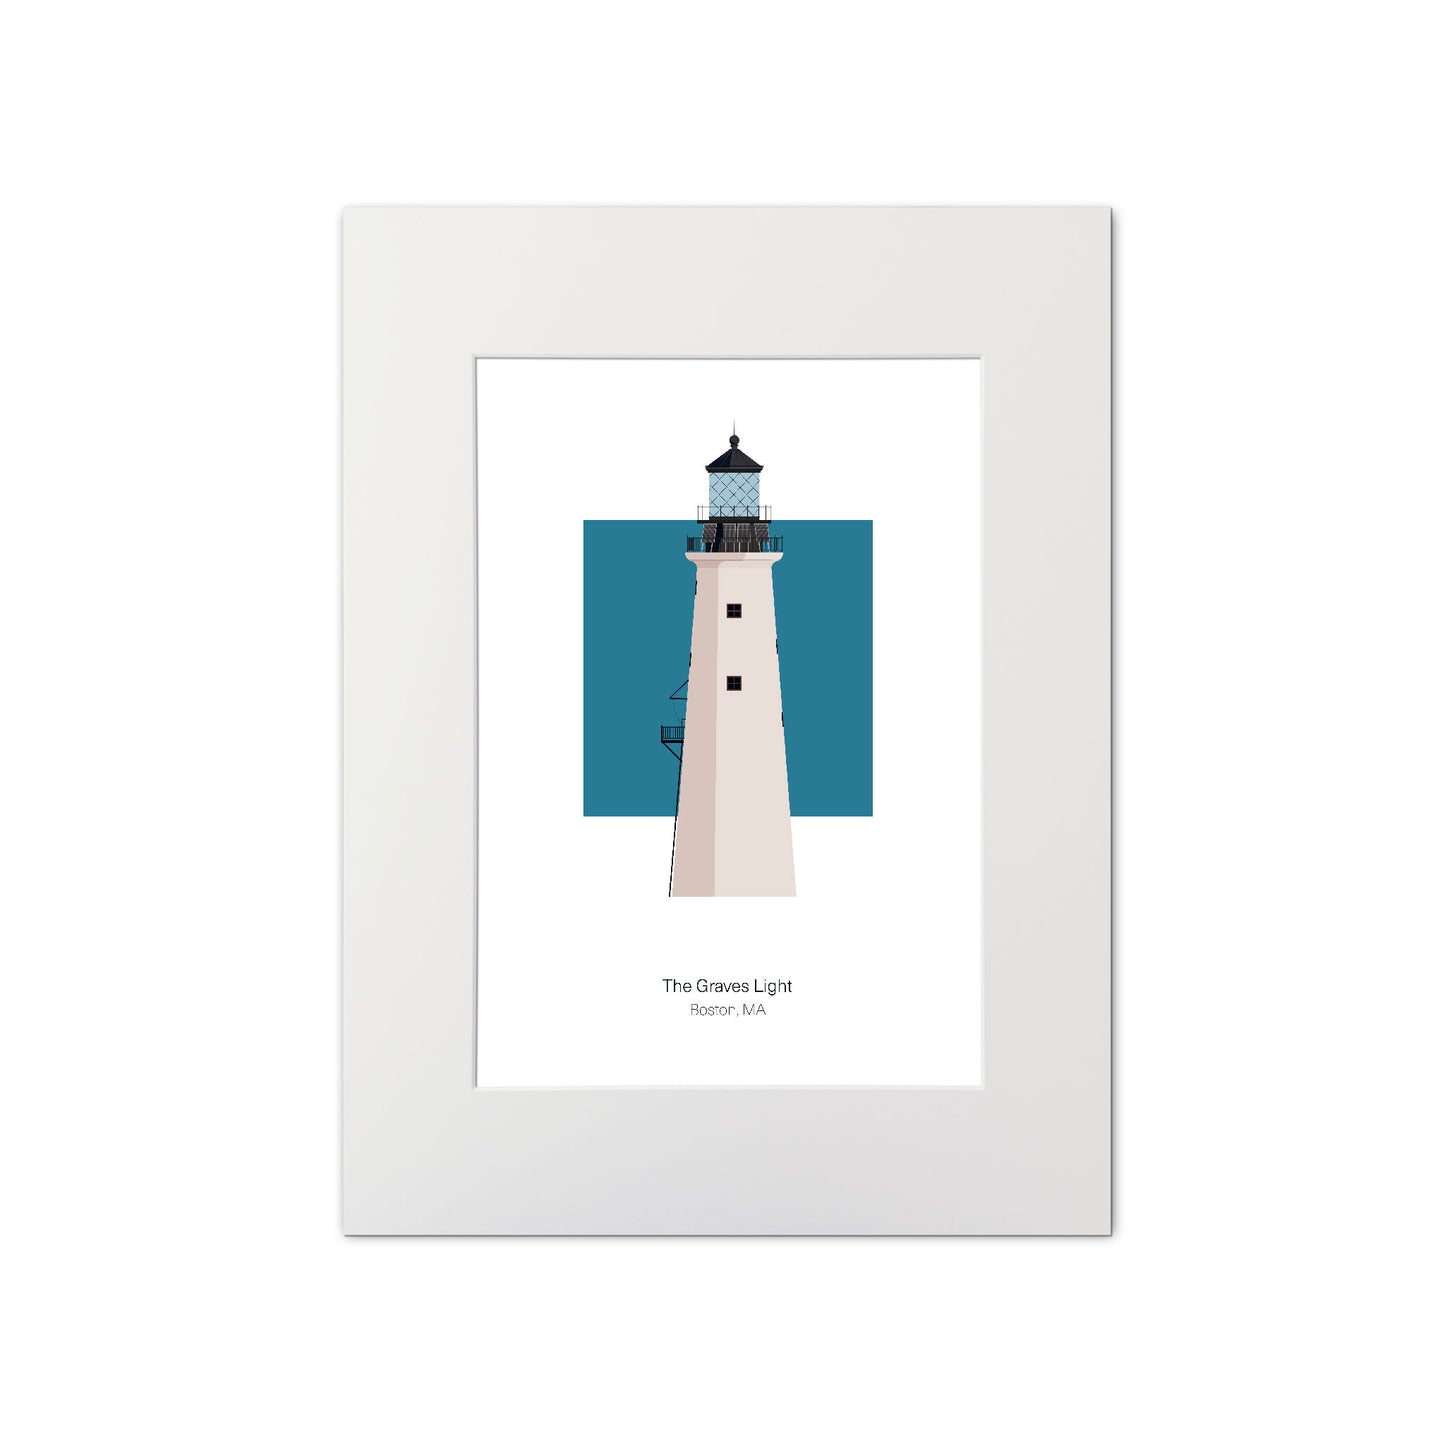 Illustration of the The Graves lighthouse, MA, USA. On a white background with aqua blue square as a backdrop., mounted and measuring 11"x14" (30x40cm).